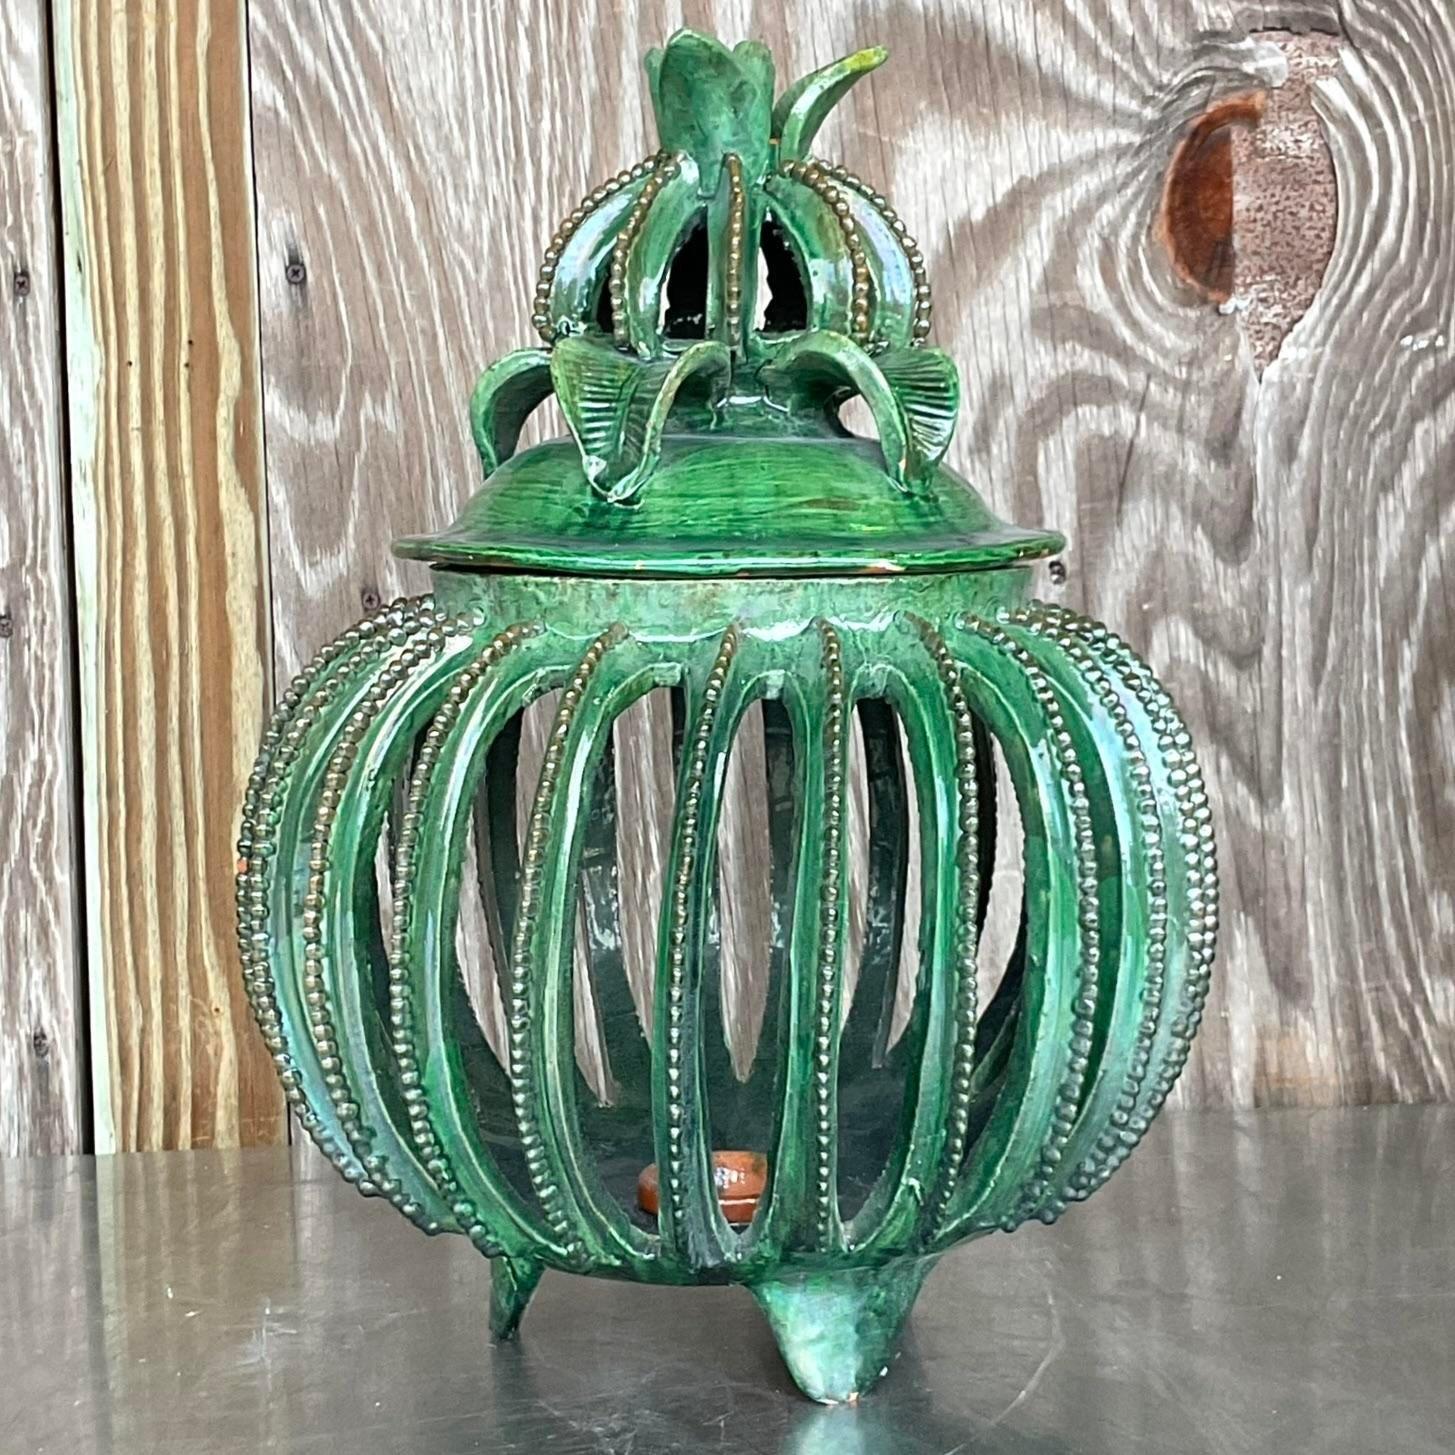  stunning vintage boho pineapple. Made by the iconic Mexican ceramicist Hilario Alejo Madrigal. A brilliant green glazed ceramic shape. Acquired from a Palm Beach estate.